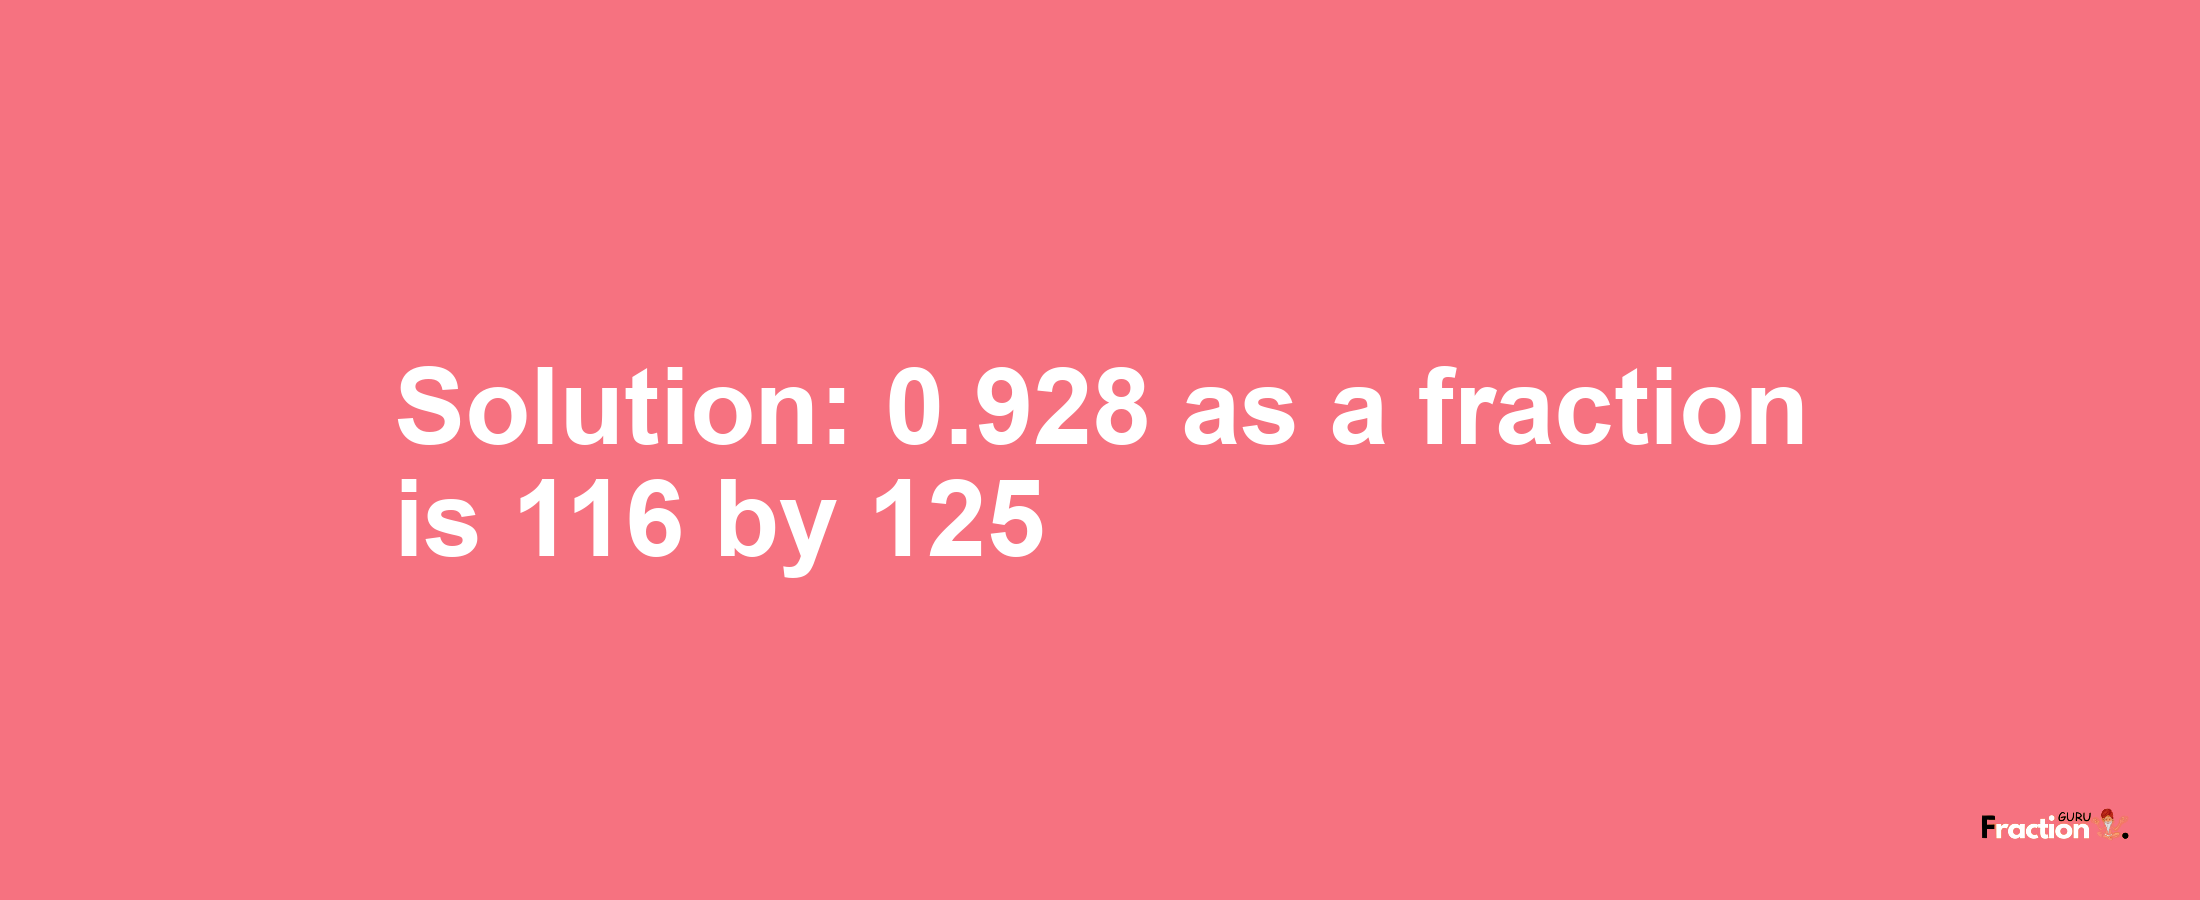 Solution:0.928 as a fraction is 116/125